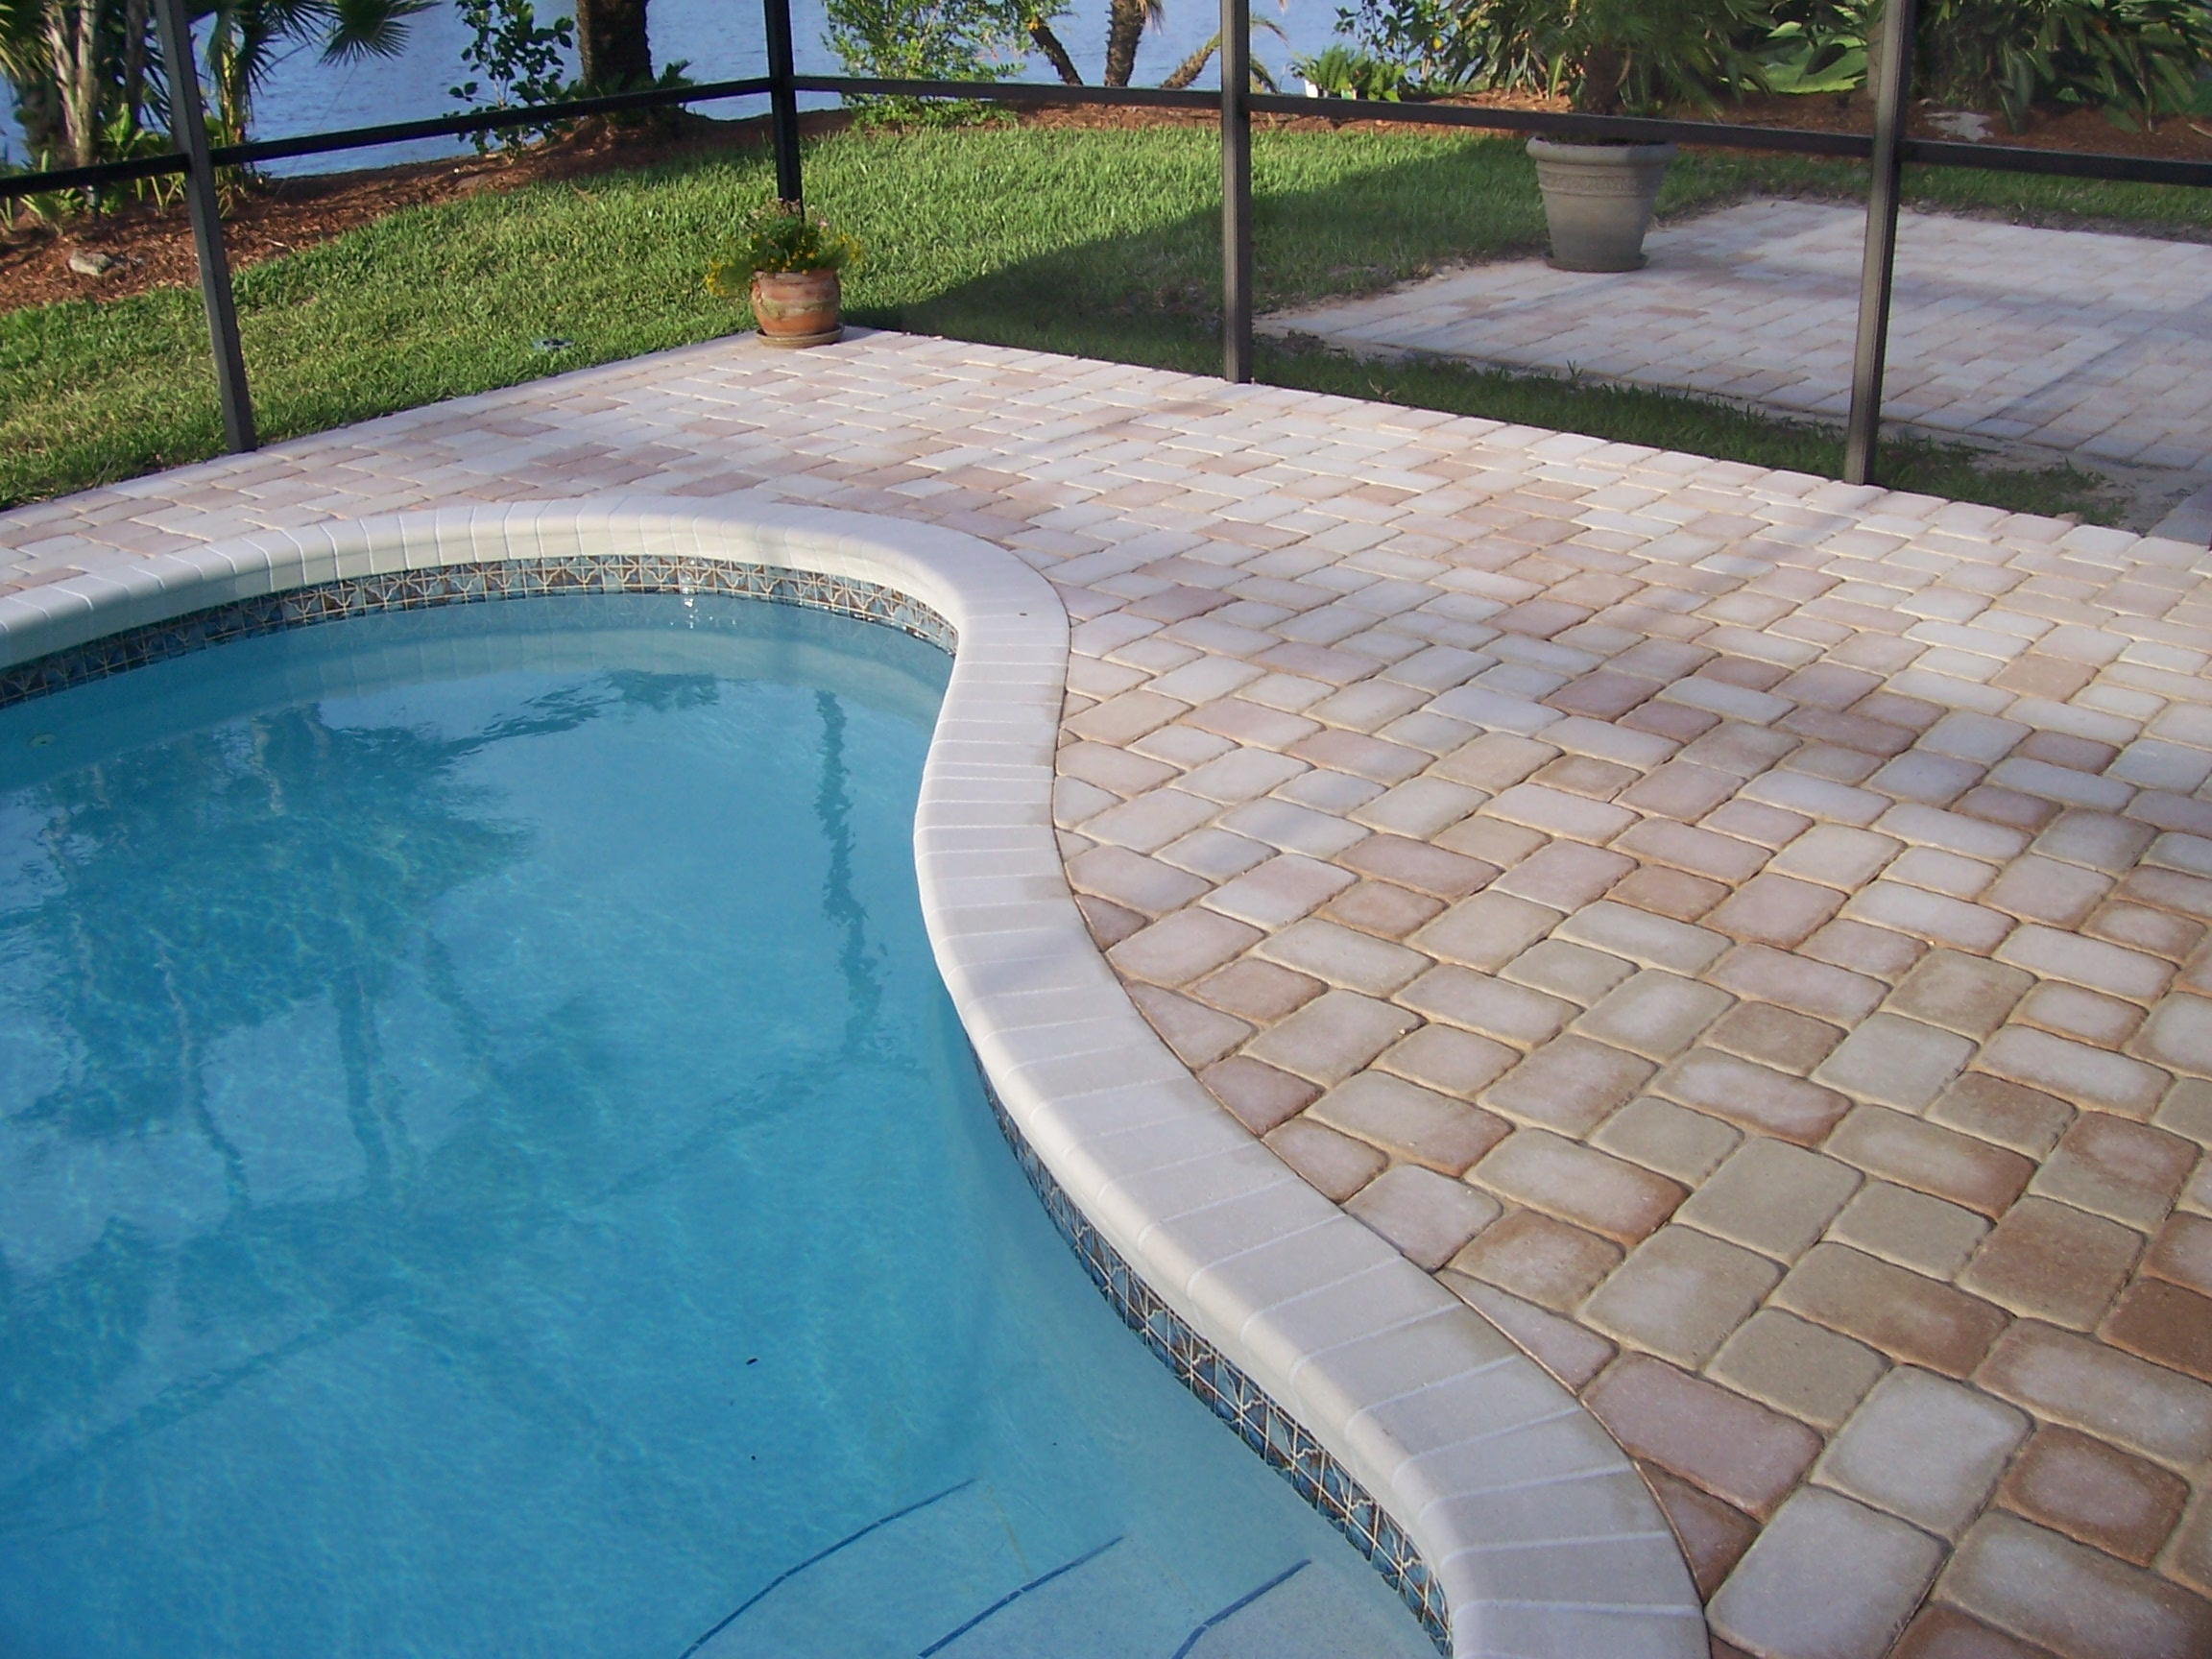 Pool Pavers Remodel Your Pool Deck With Pavers From Paverweb within dimensions 2304 X 1728